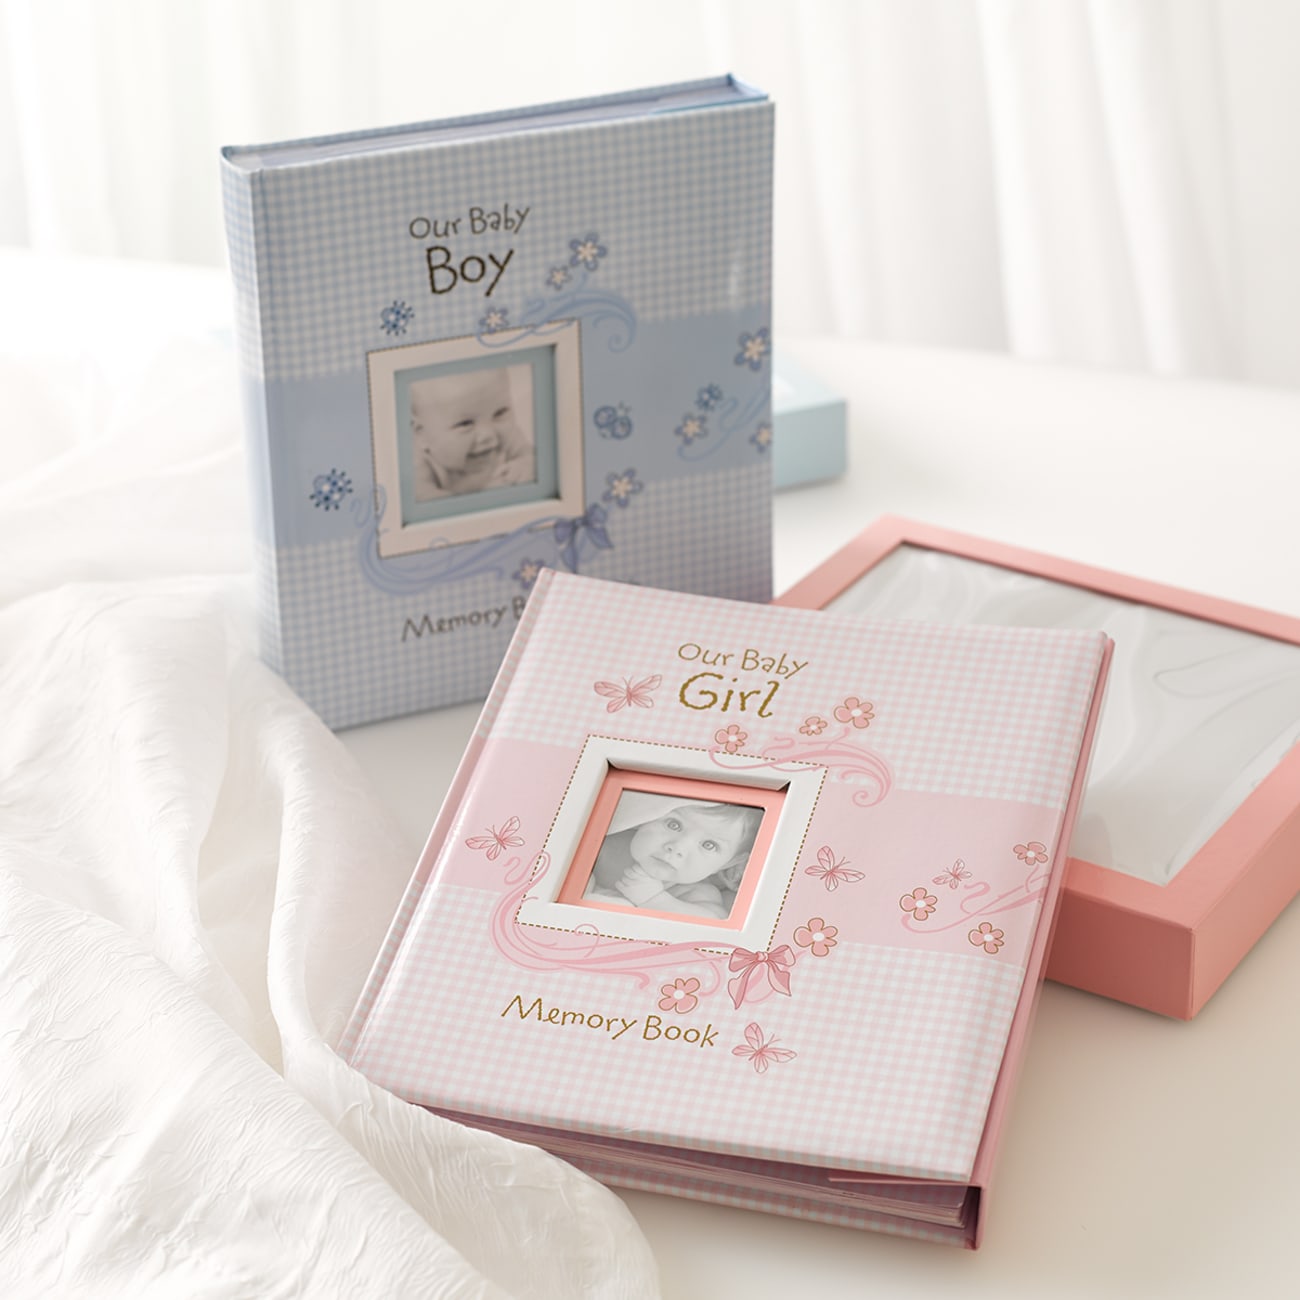 Our Baby Boy Memory Book Gift Boxed Hardback